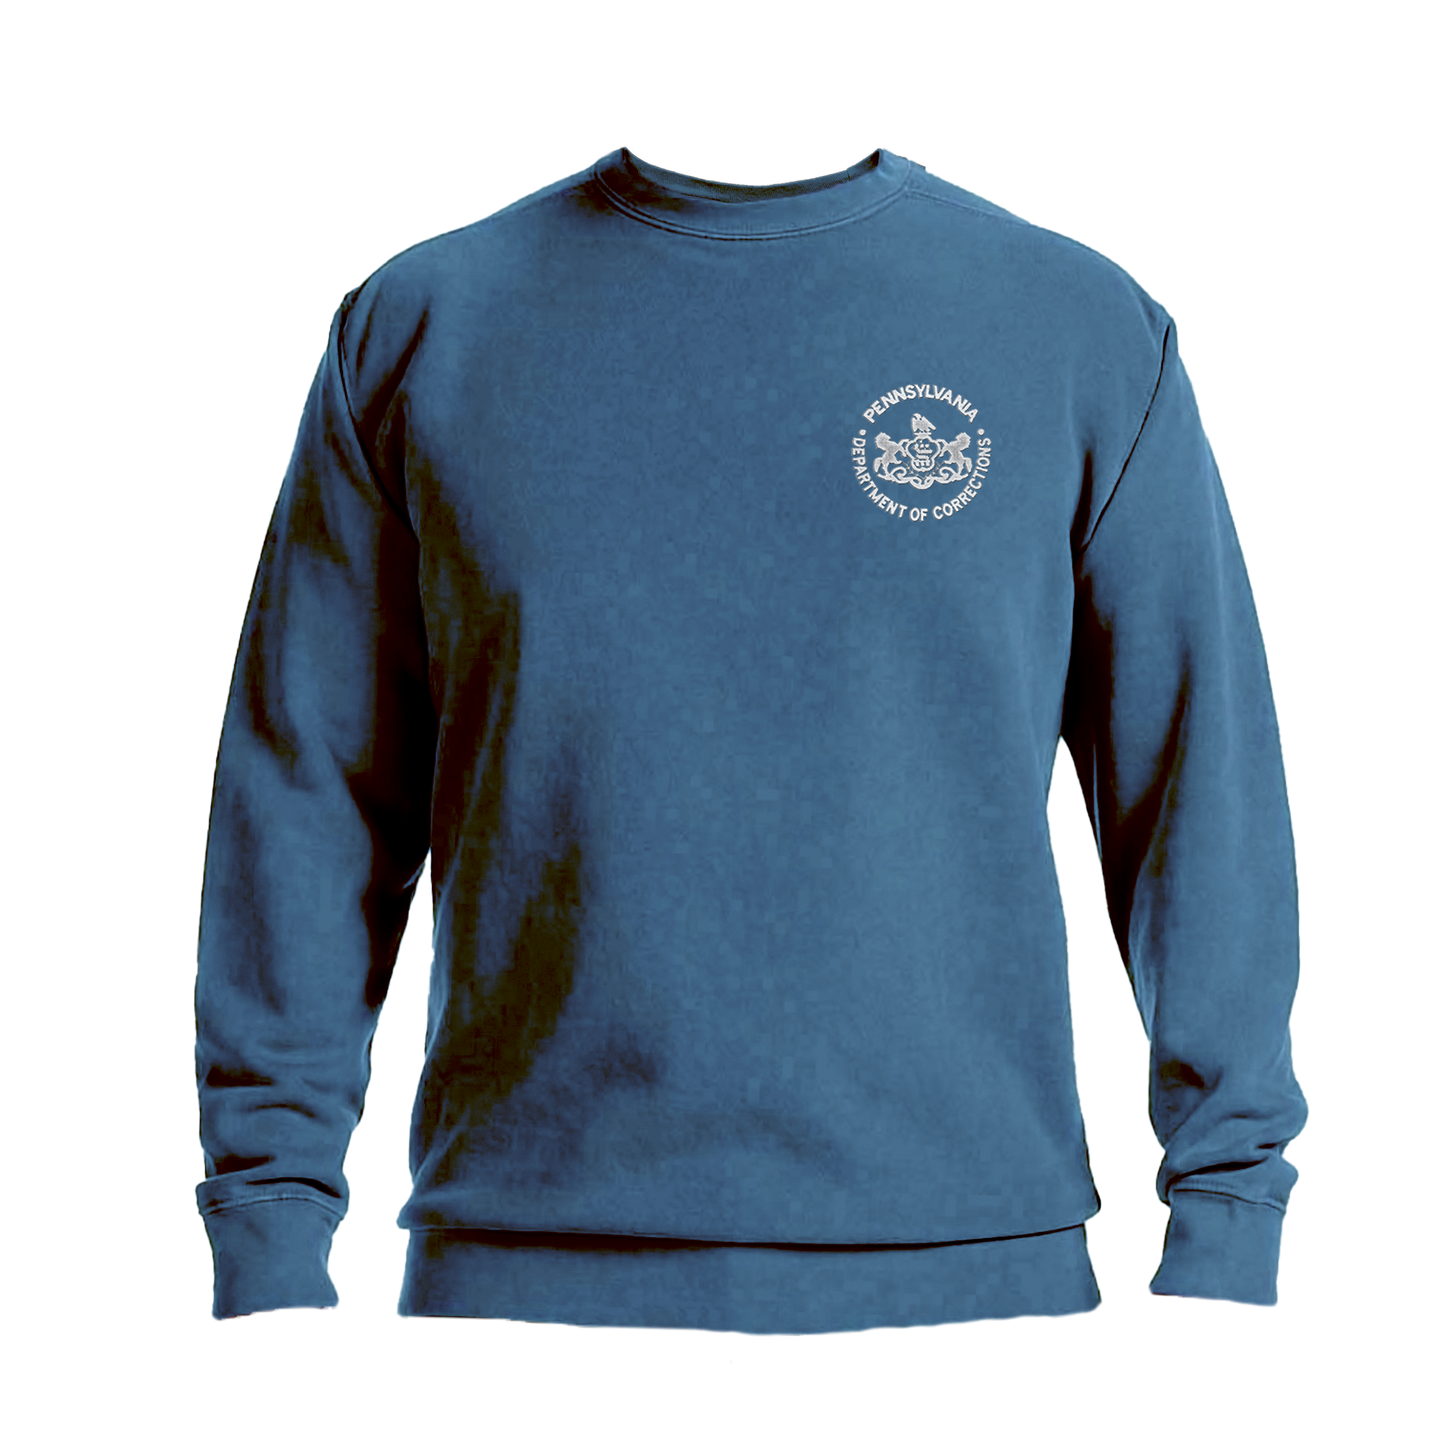 Adult Comfort Colors Crewneck Sweatshirt with Embroidered Department of Corrections Seal (Various Colors)